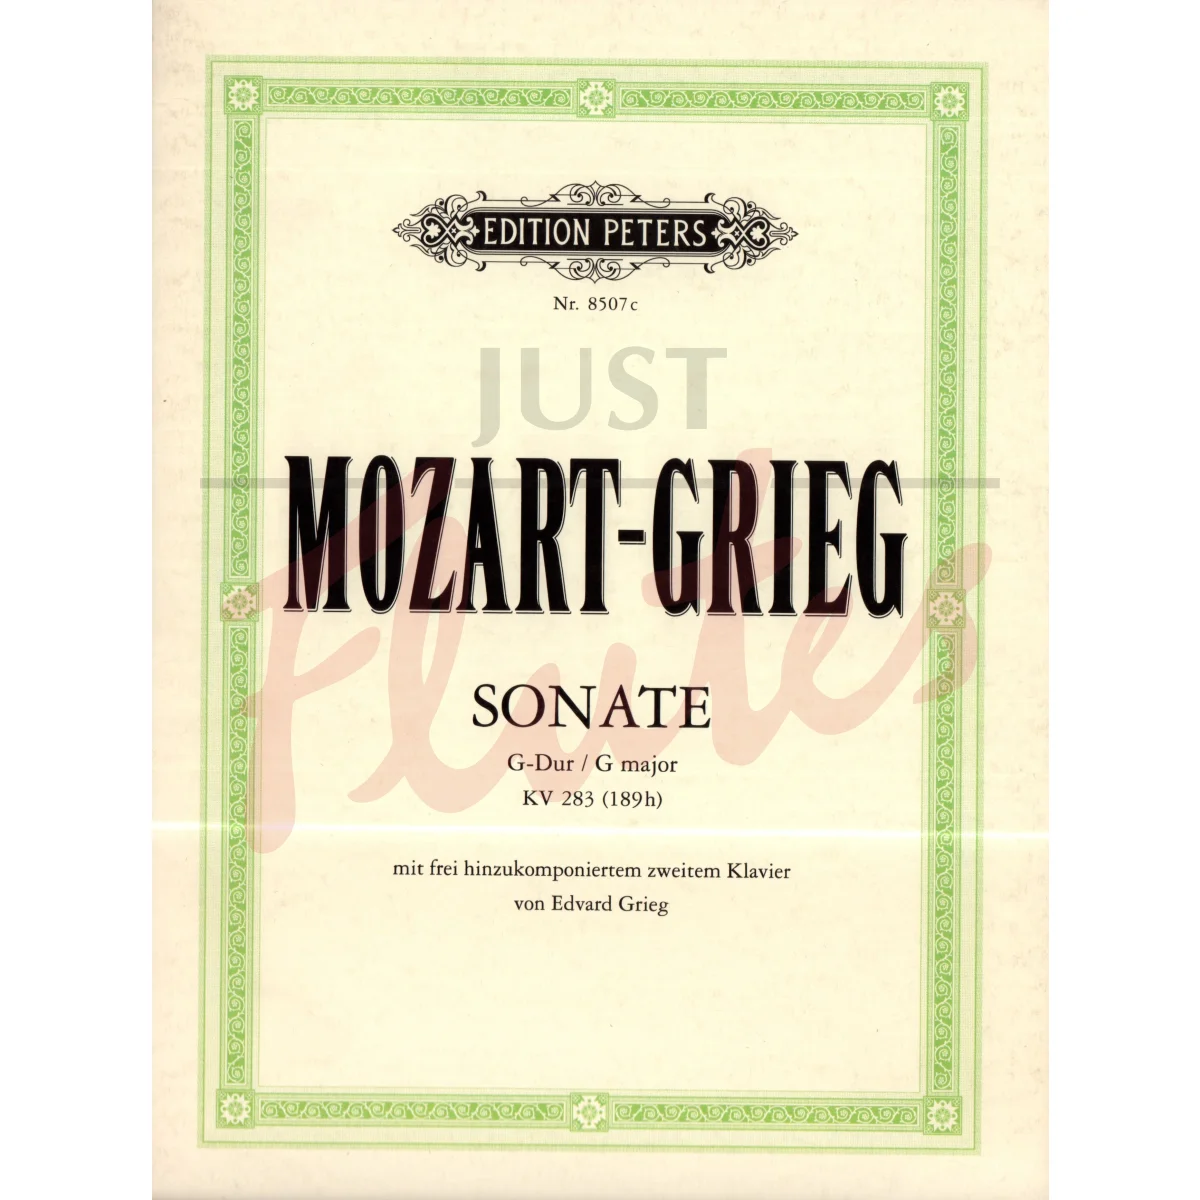 Sonata in G major for Piano Duet